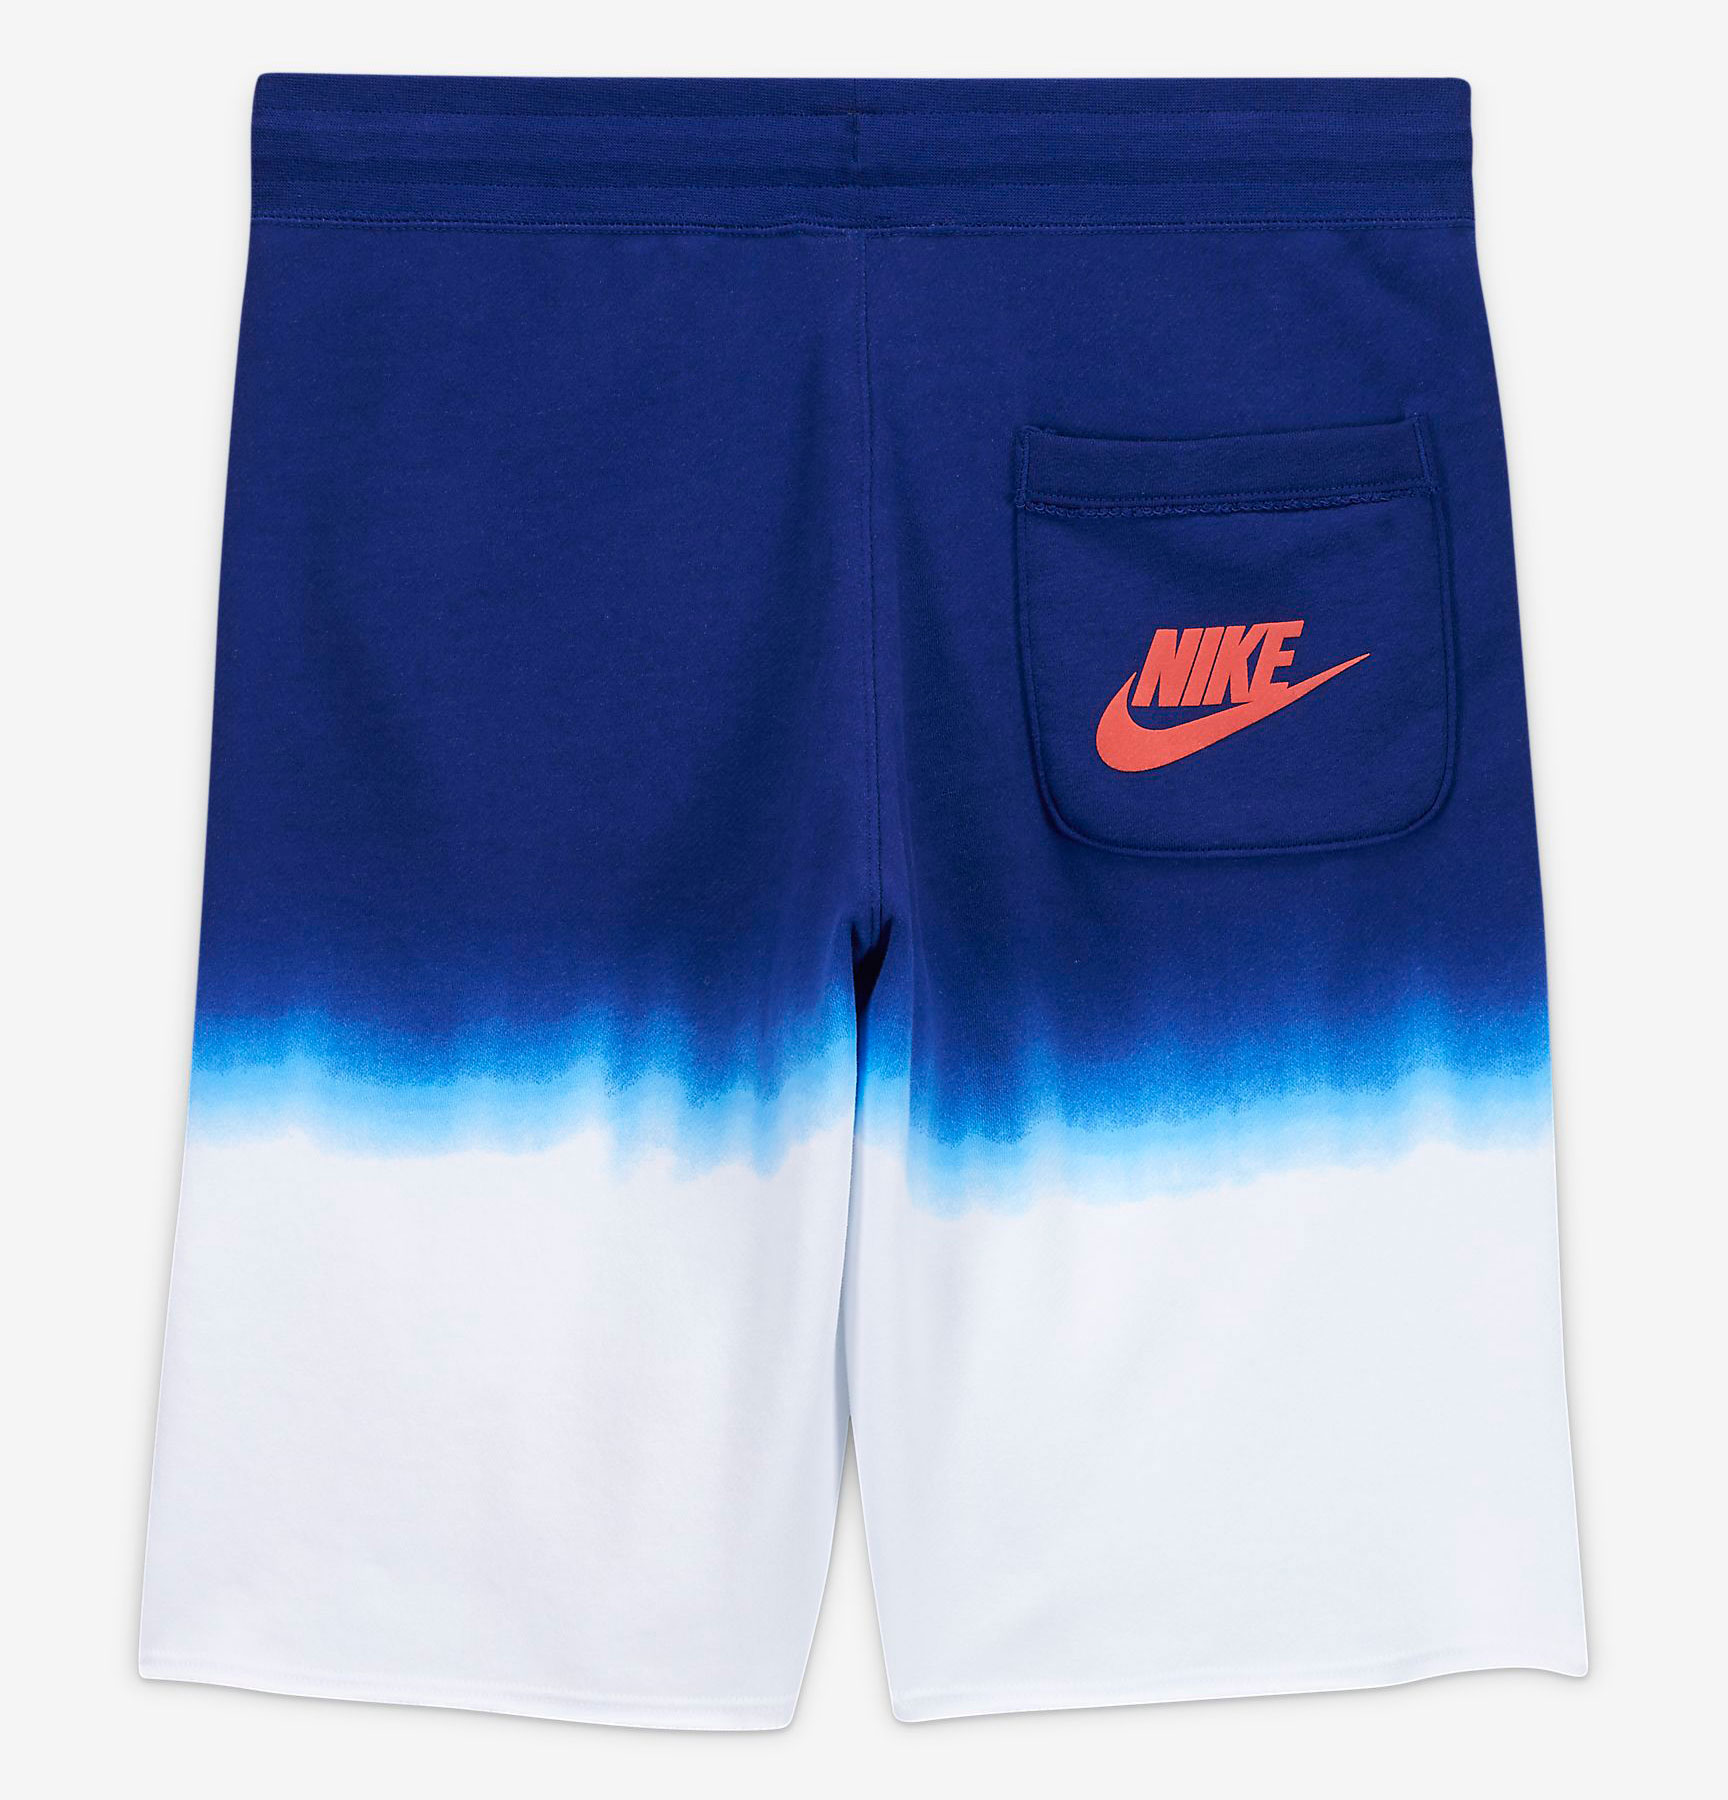 nike-kybrid-s2-what-the-usa-matching-shorts-2